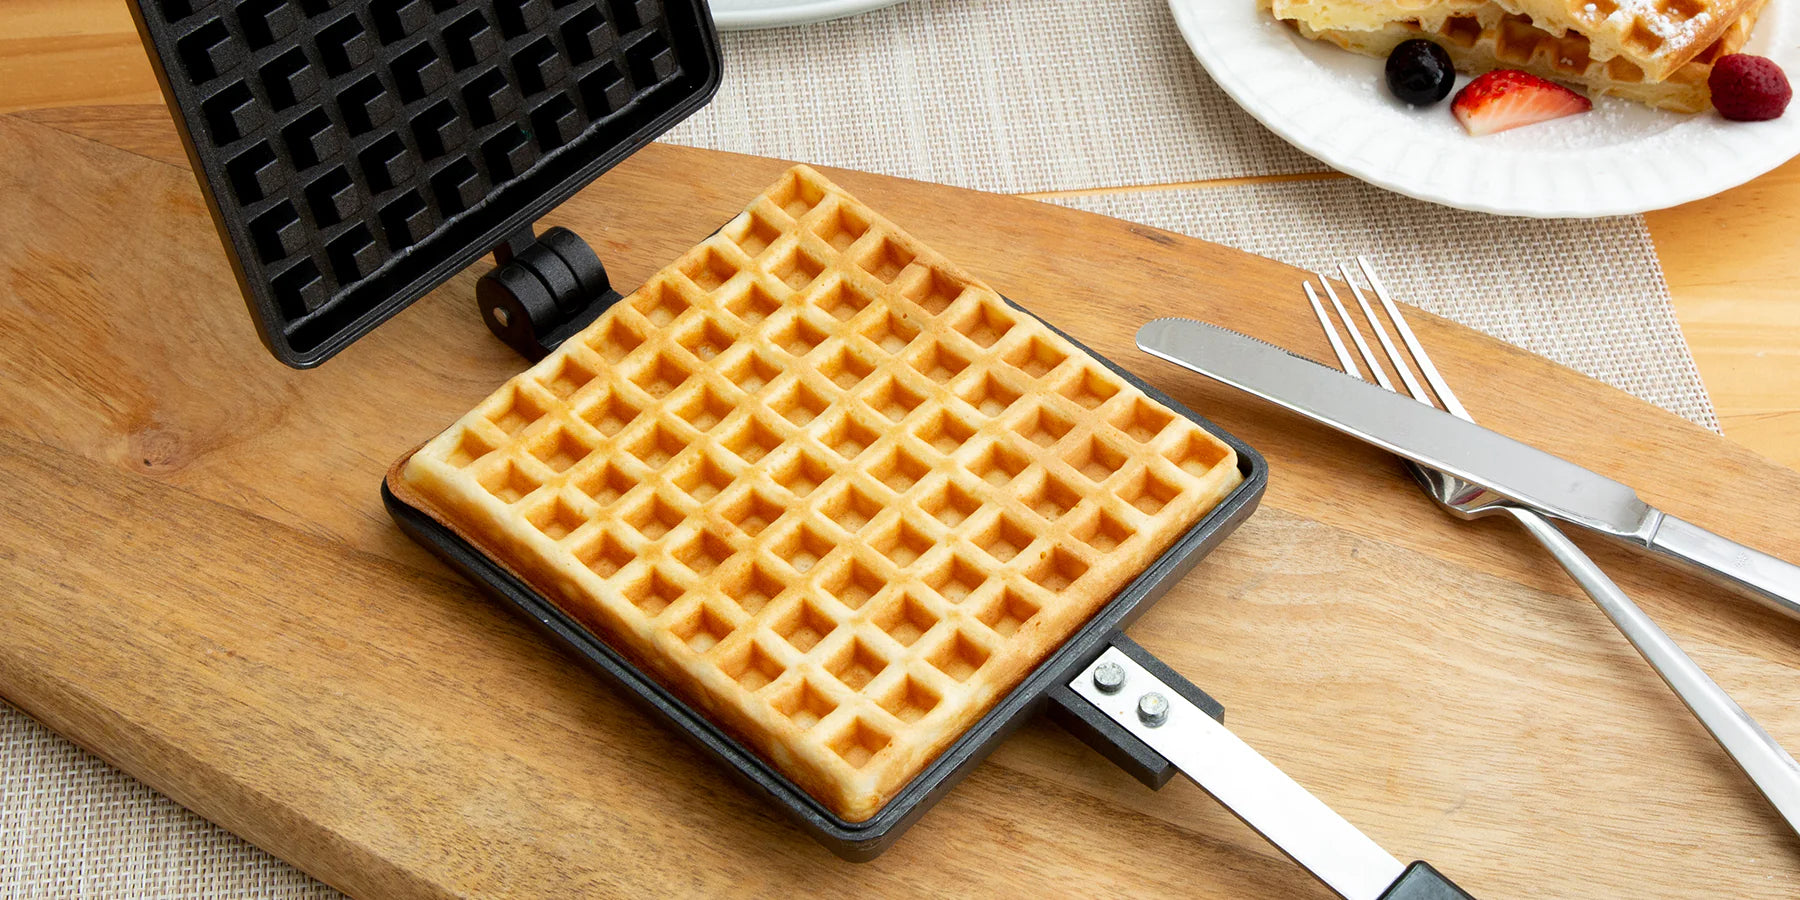 Discover our great selection of Waffle Irons at Globalkitchen Japan.